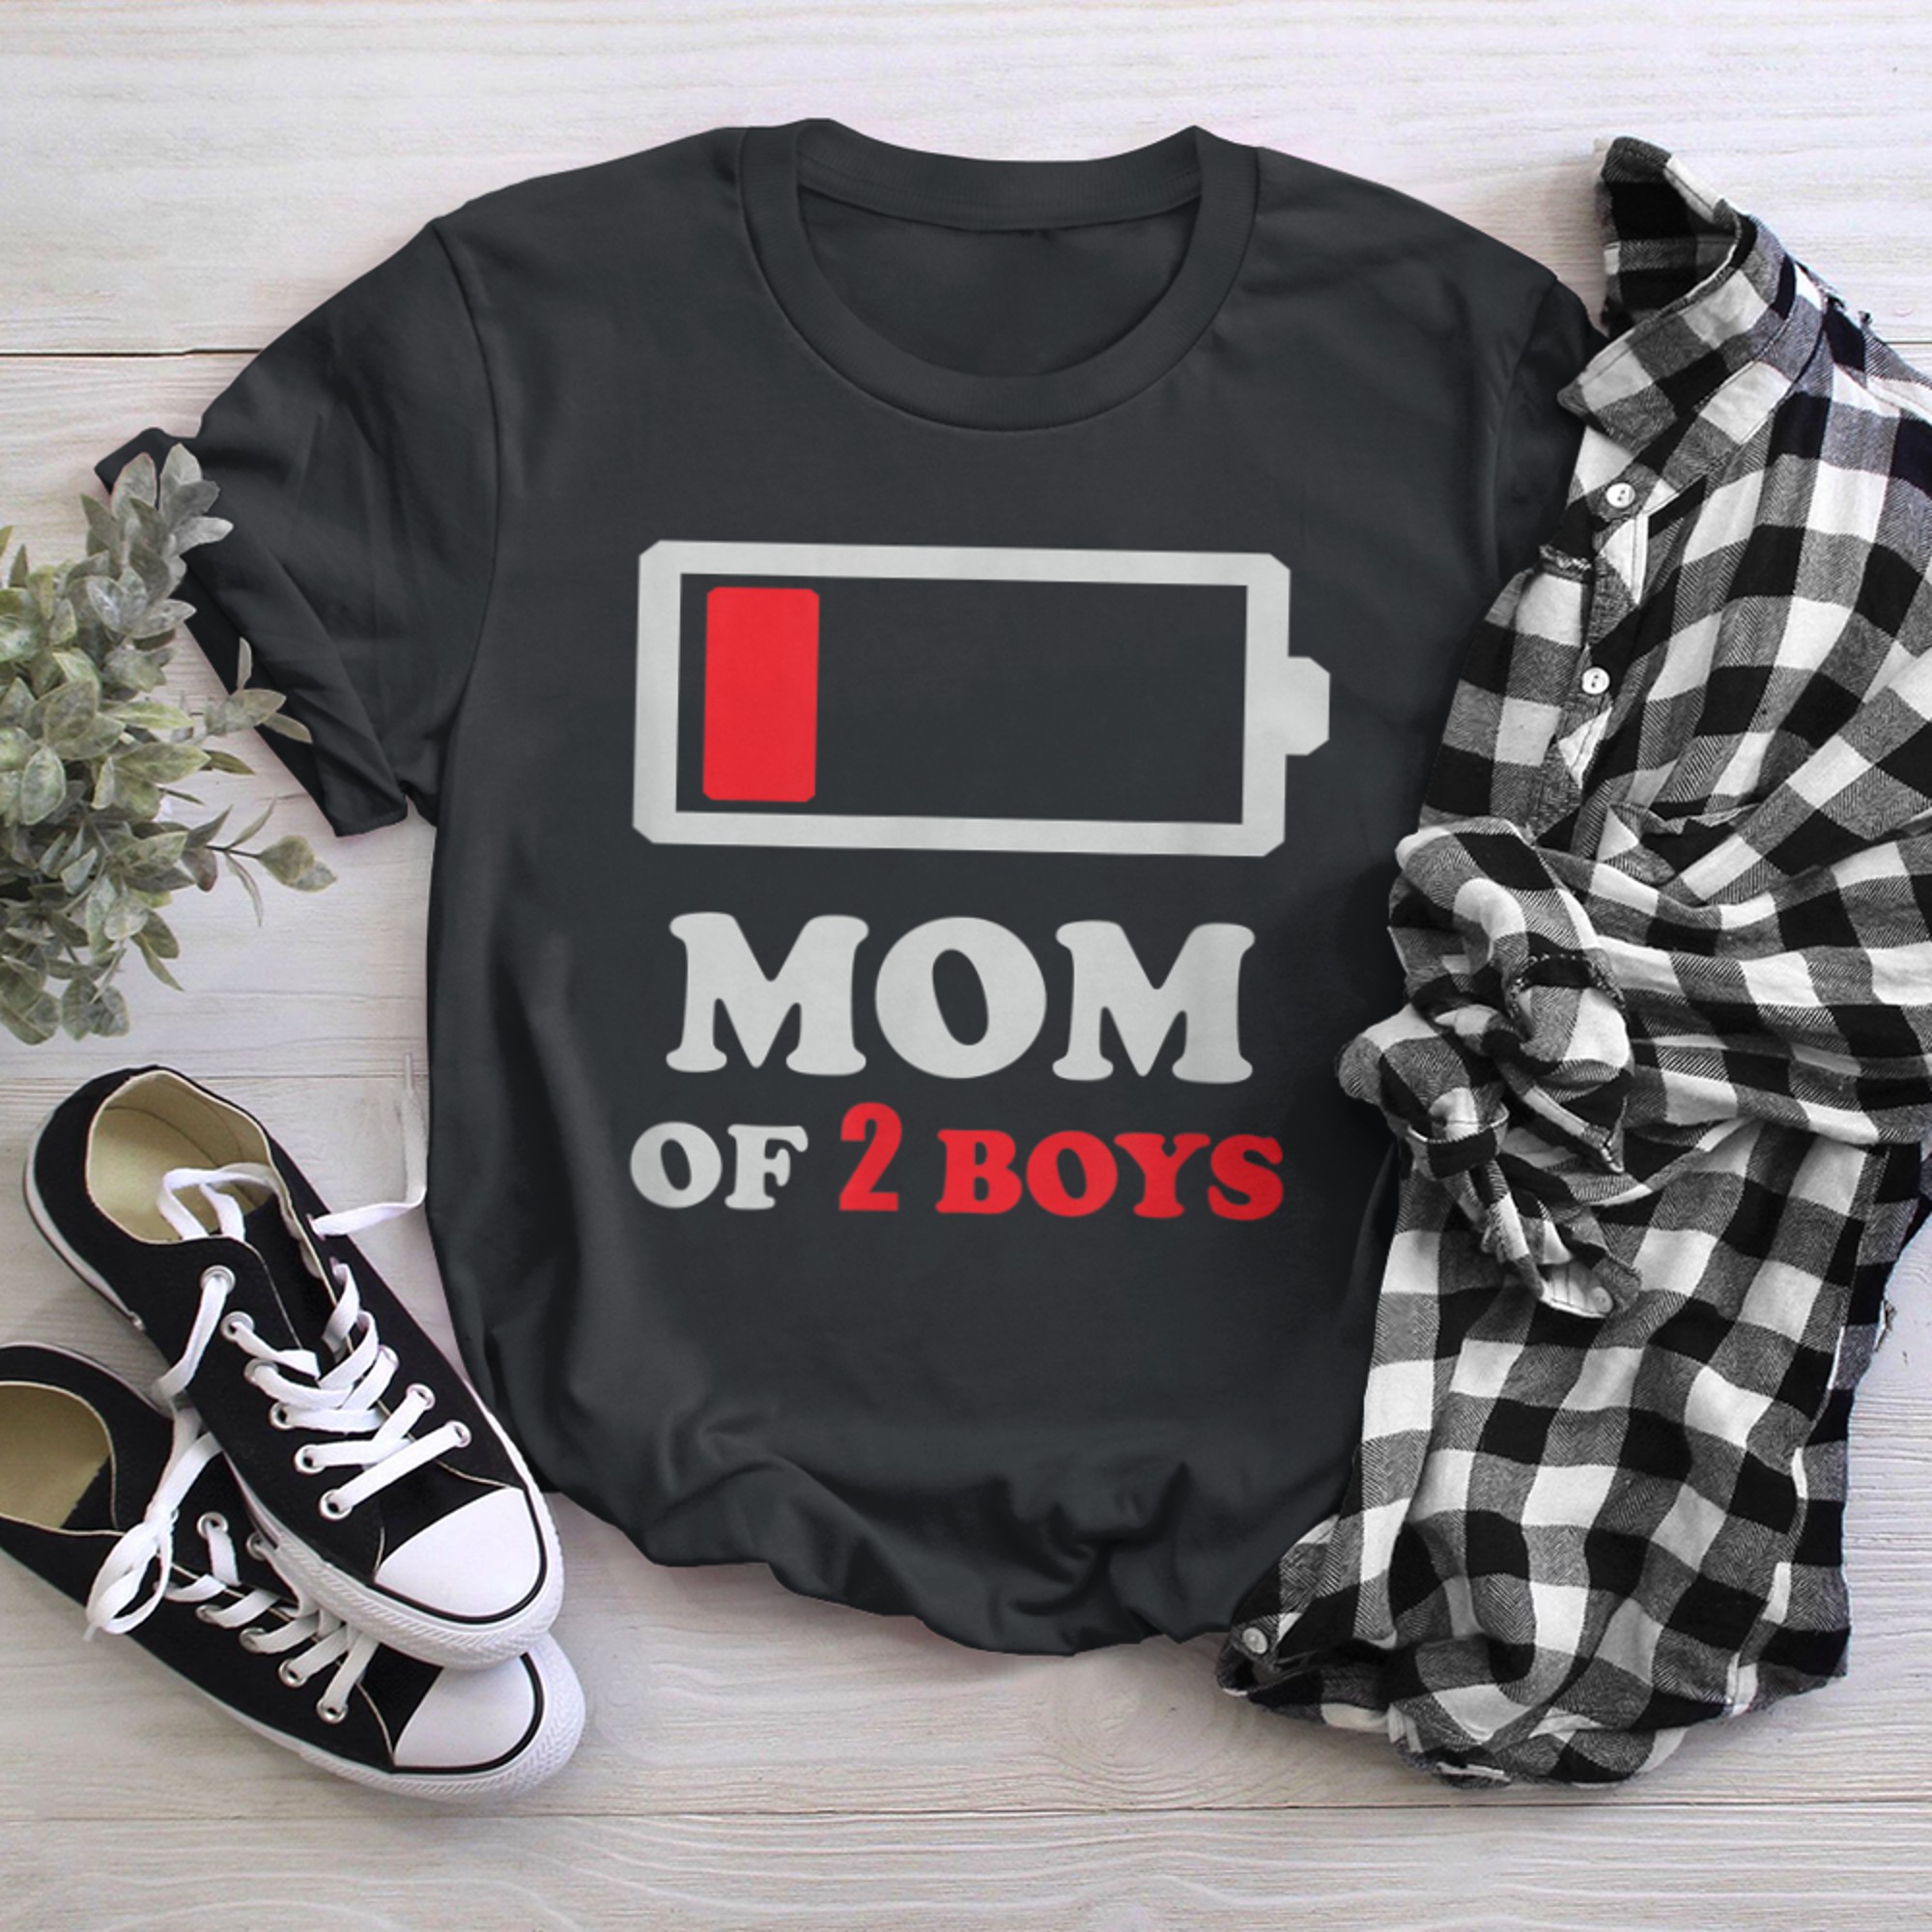 Mom of ,mom of two, mother's days t-shirt black